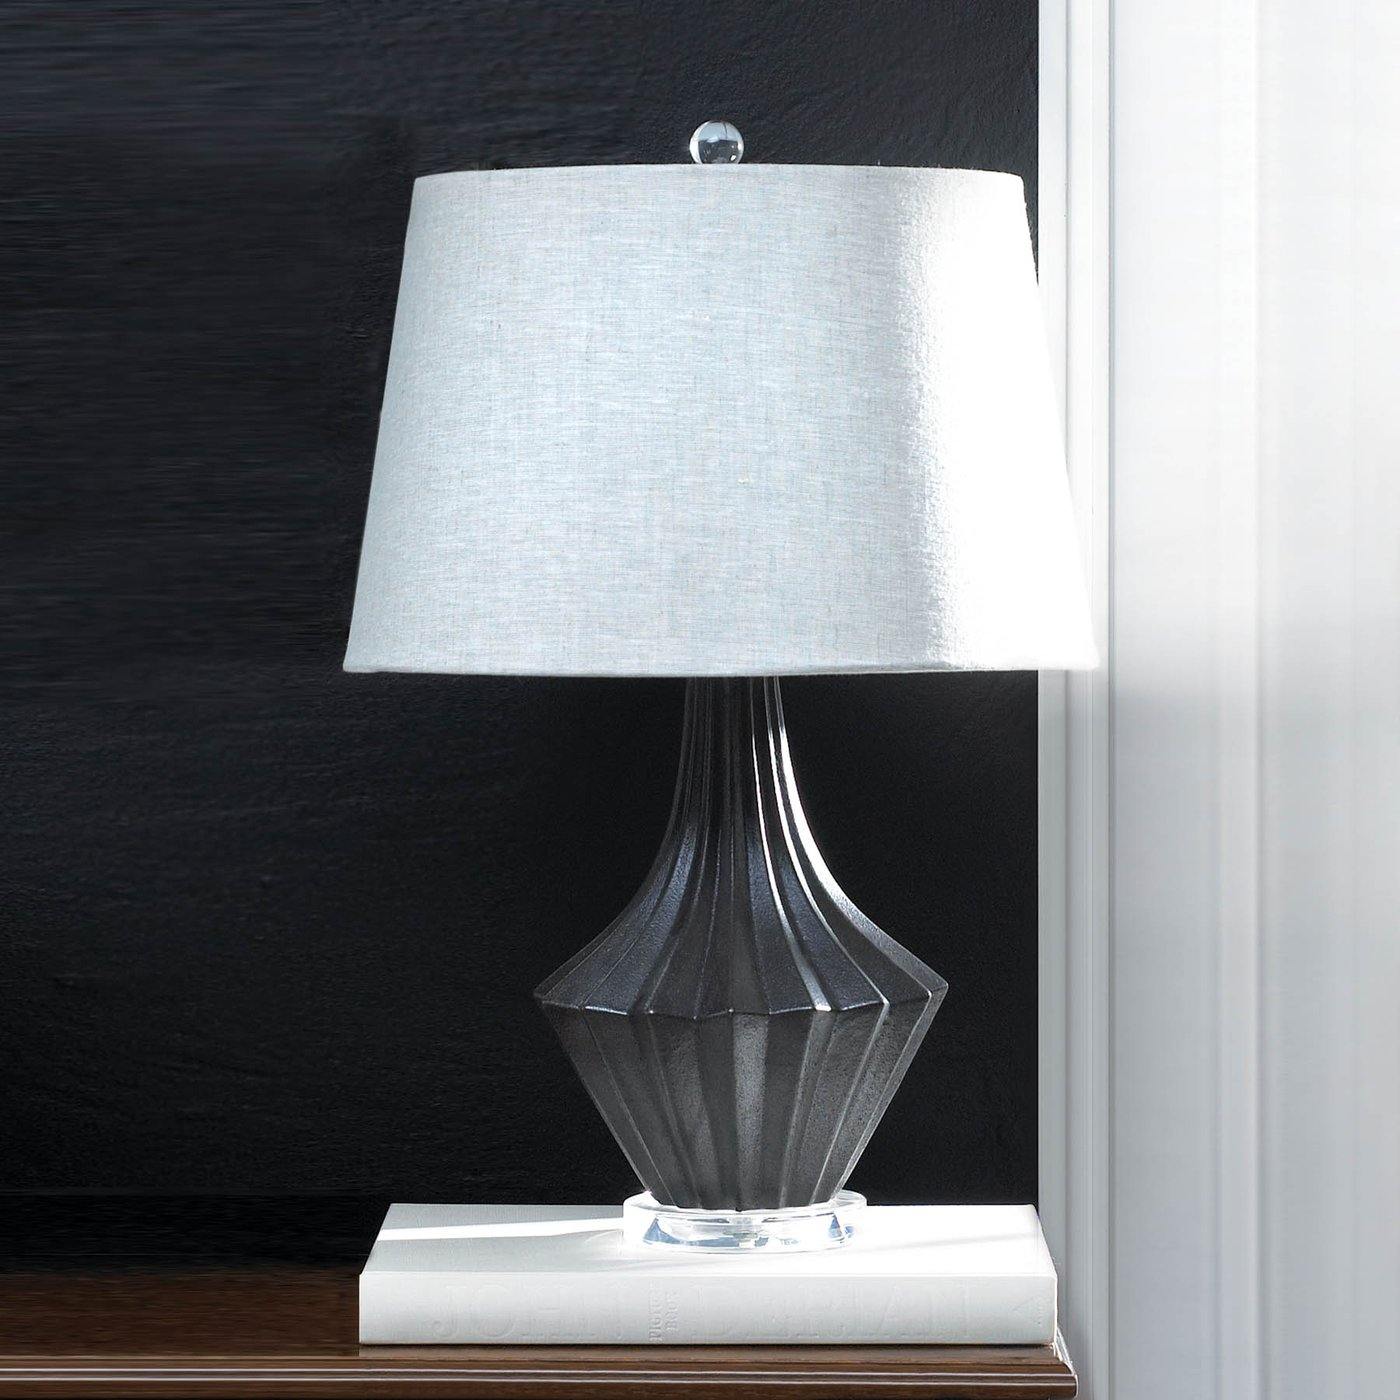 Black and Gray Porcelain Table Lamp with Linen Shade - Hop Decor